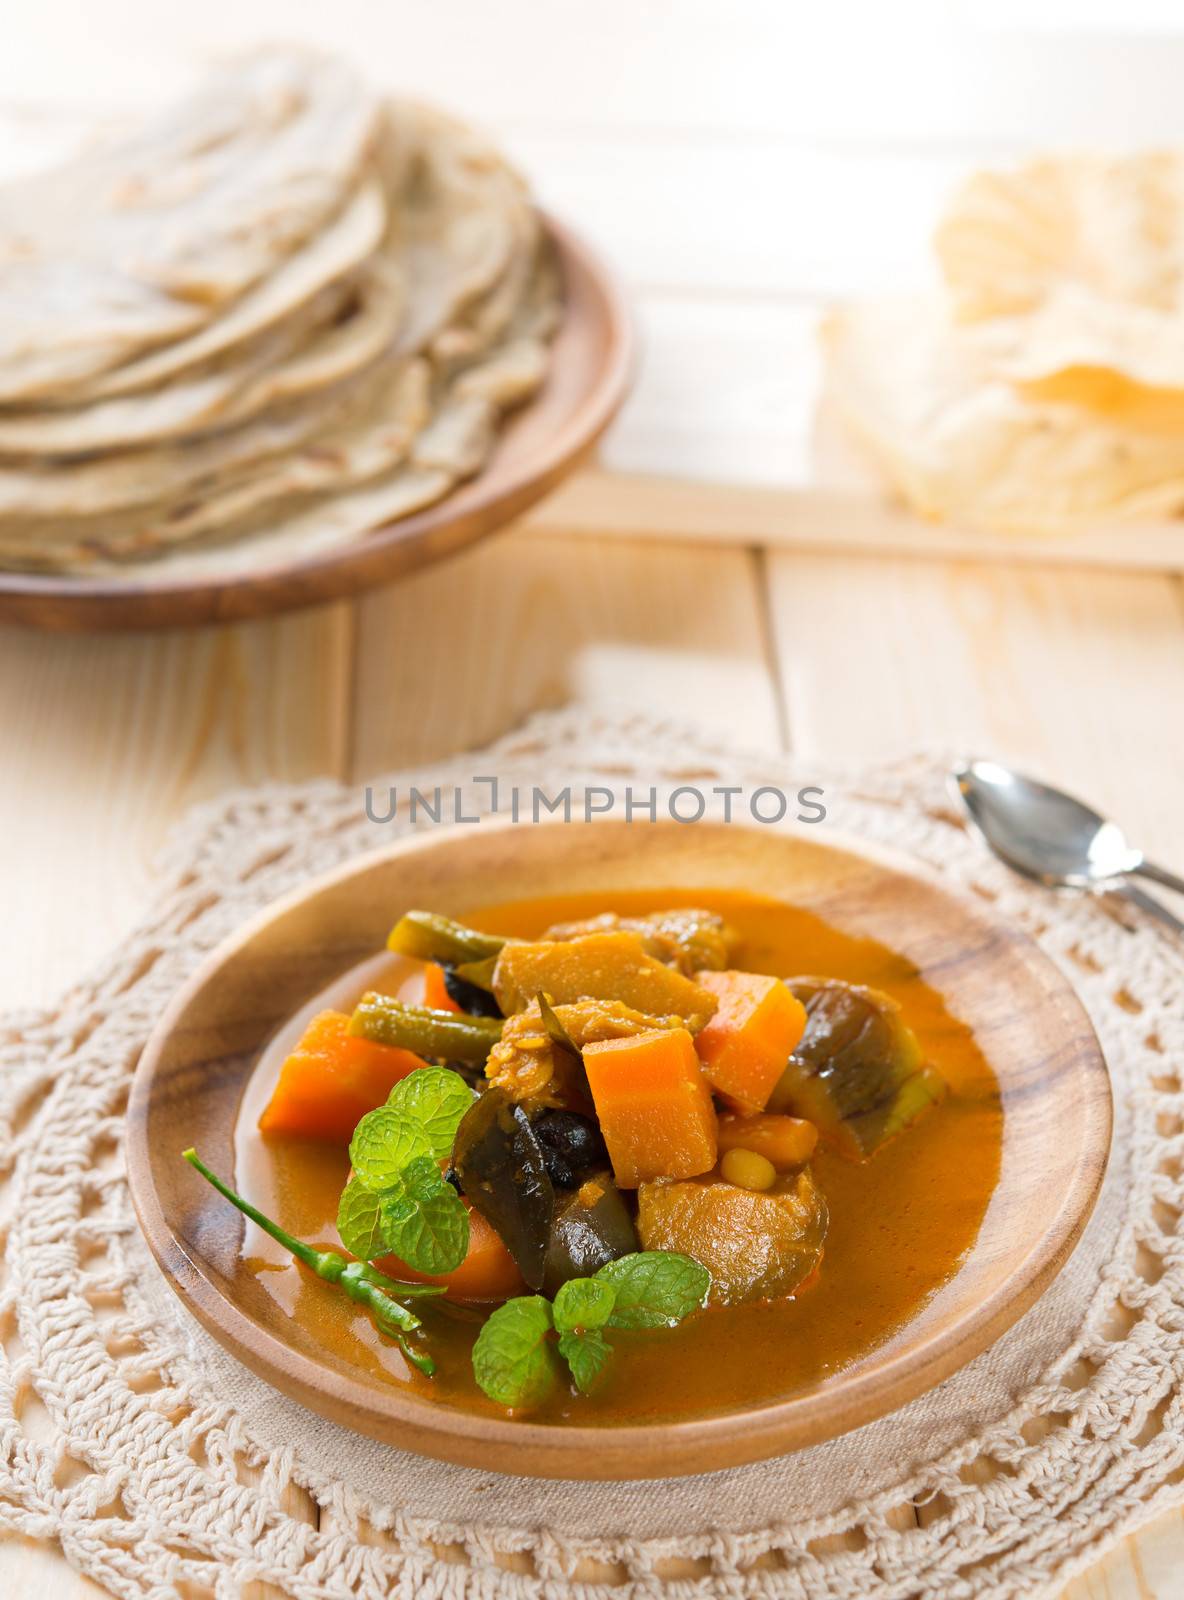 Vegetable curry dhal, chapatti roti or Flat bread and papadom. Indian food on dining table.